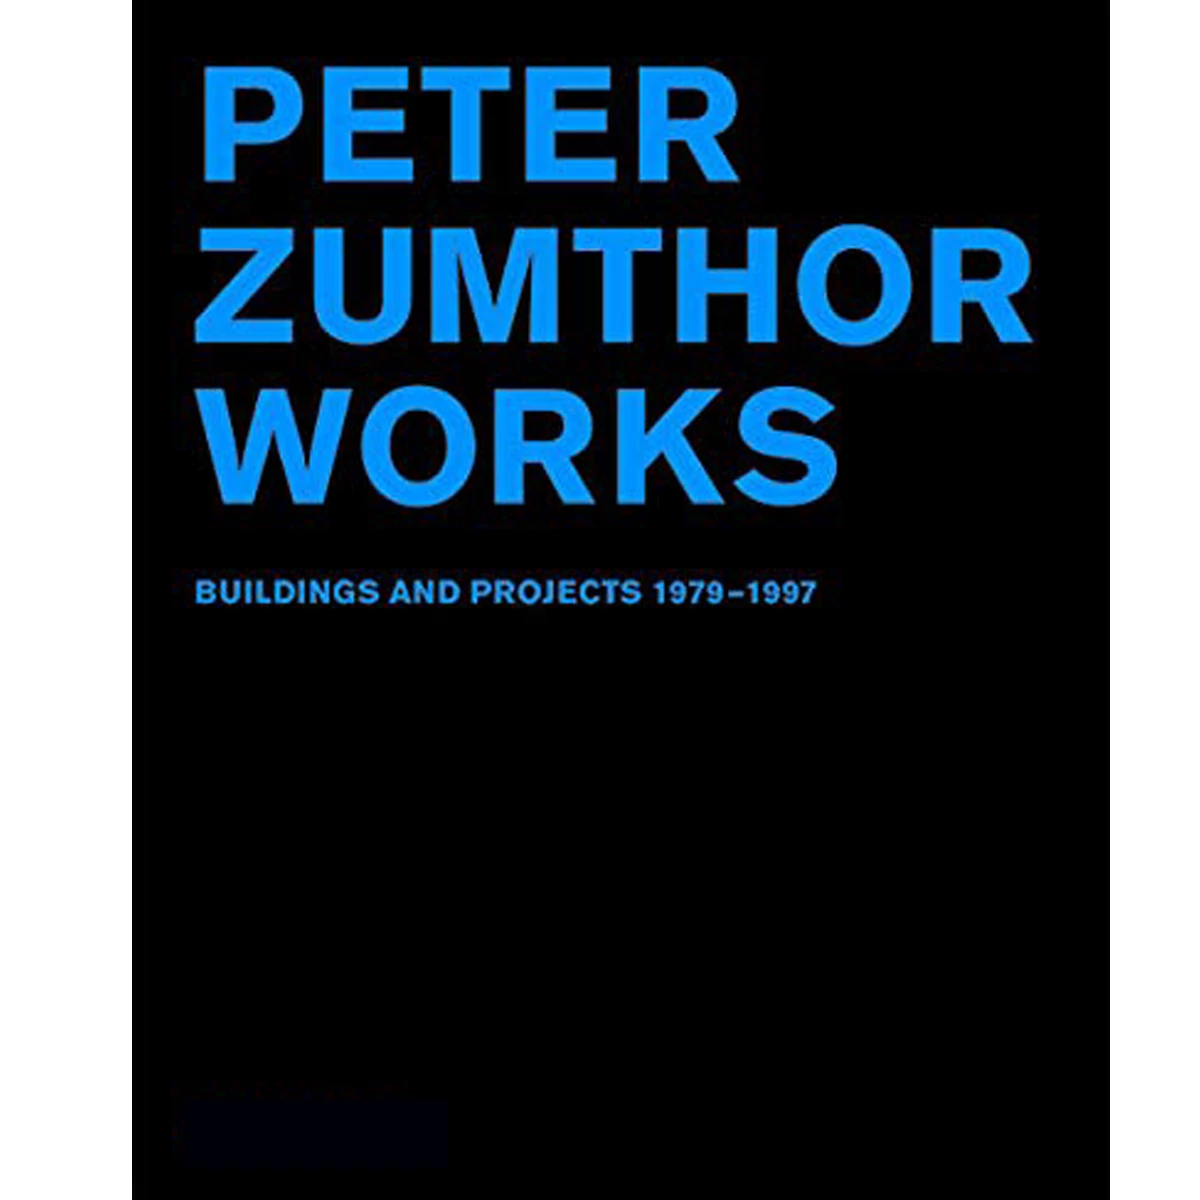 Peter Zumthor Works: Building and Projects 1979-1997